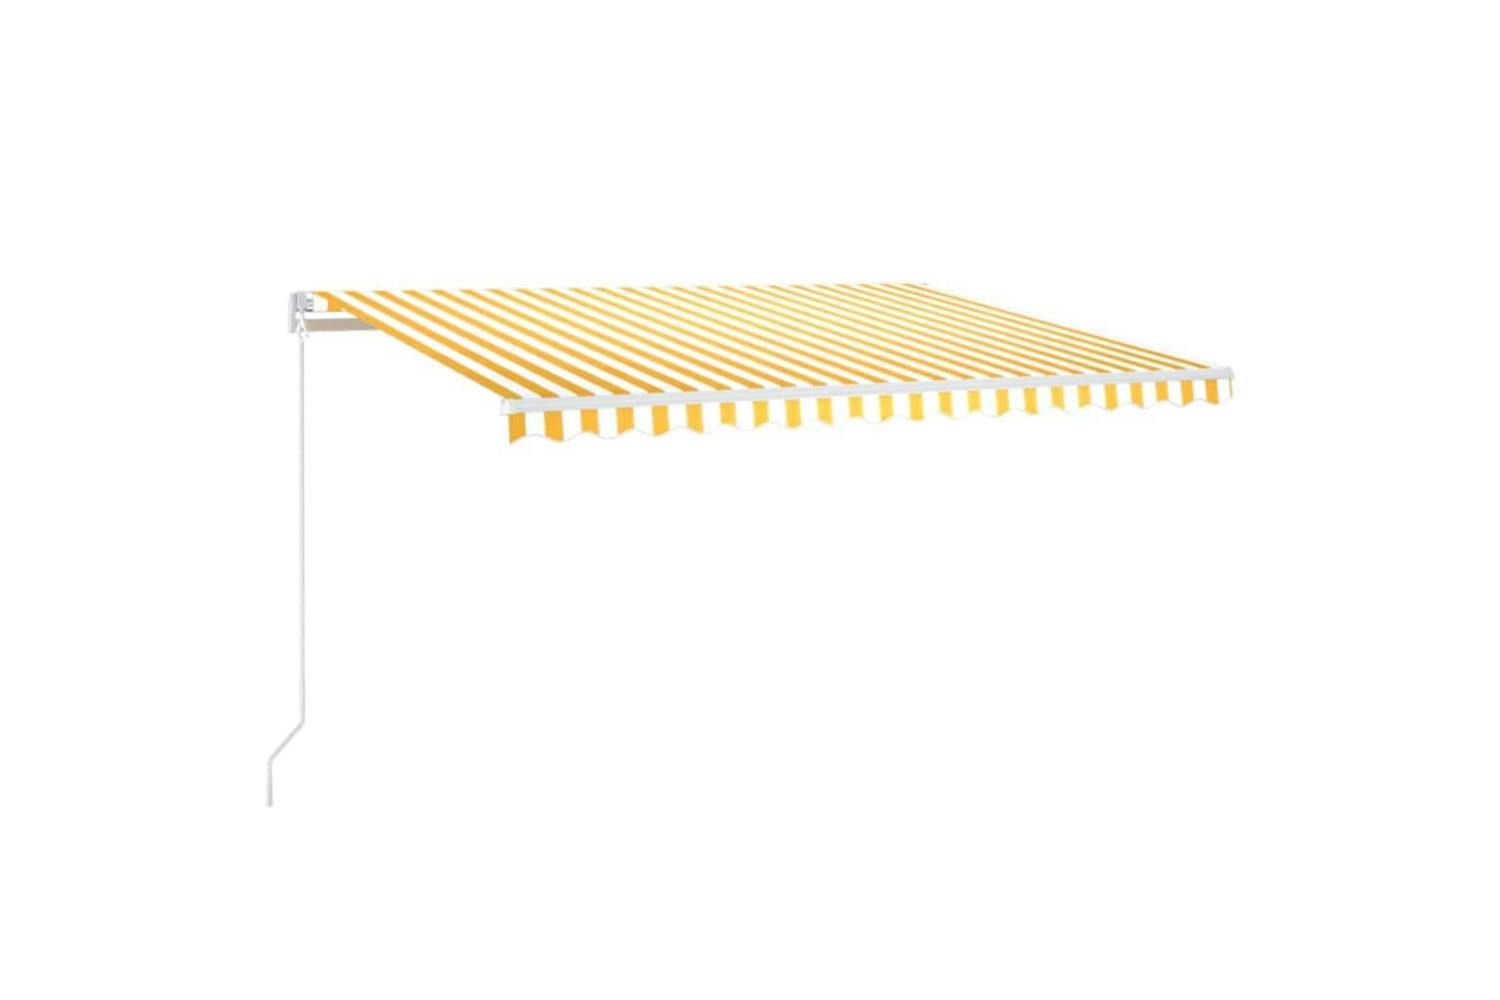 Vidaxl 3068983 Manual Retractable Awning With Led 400x350 Cm Yellow And White